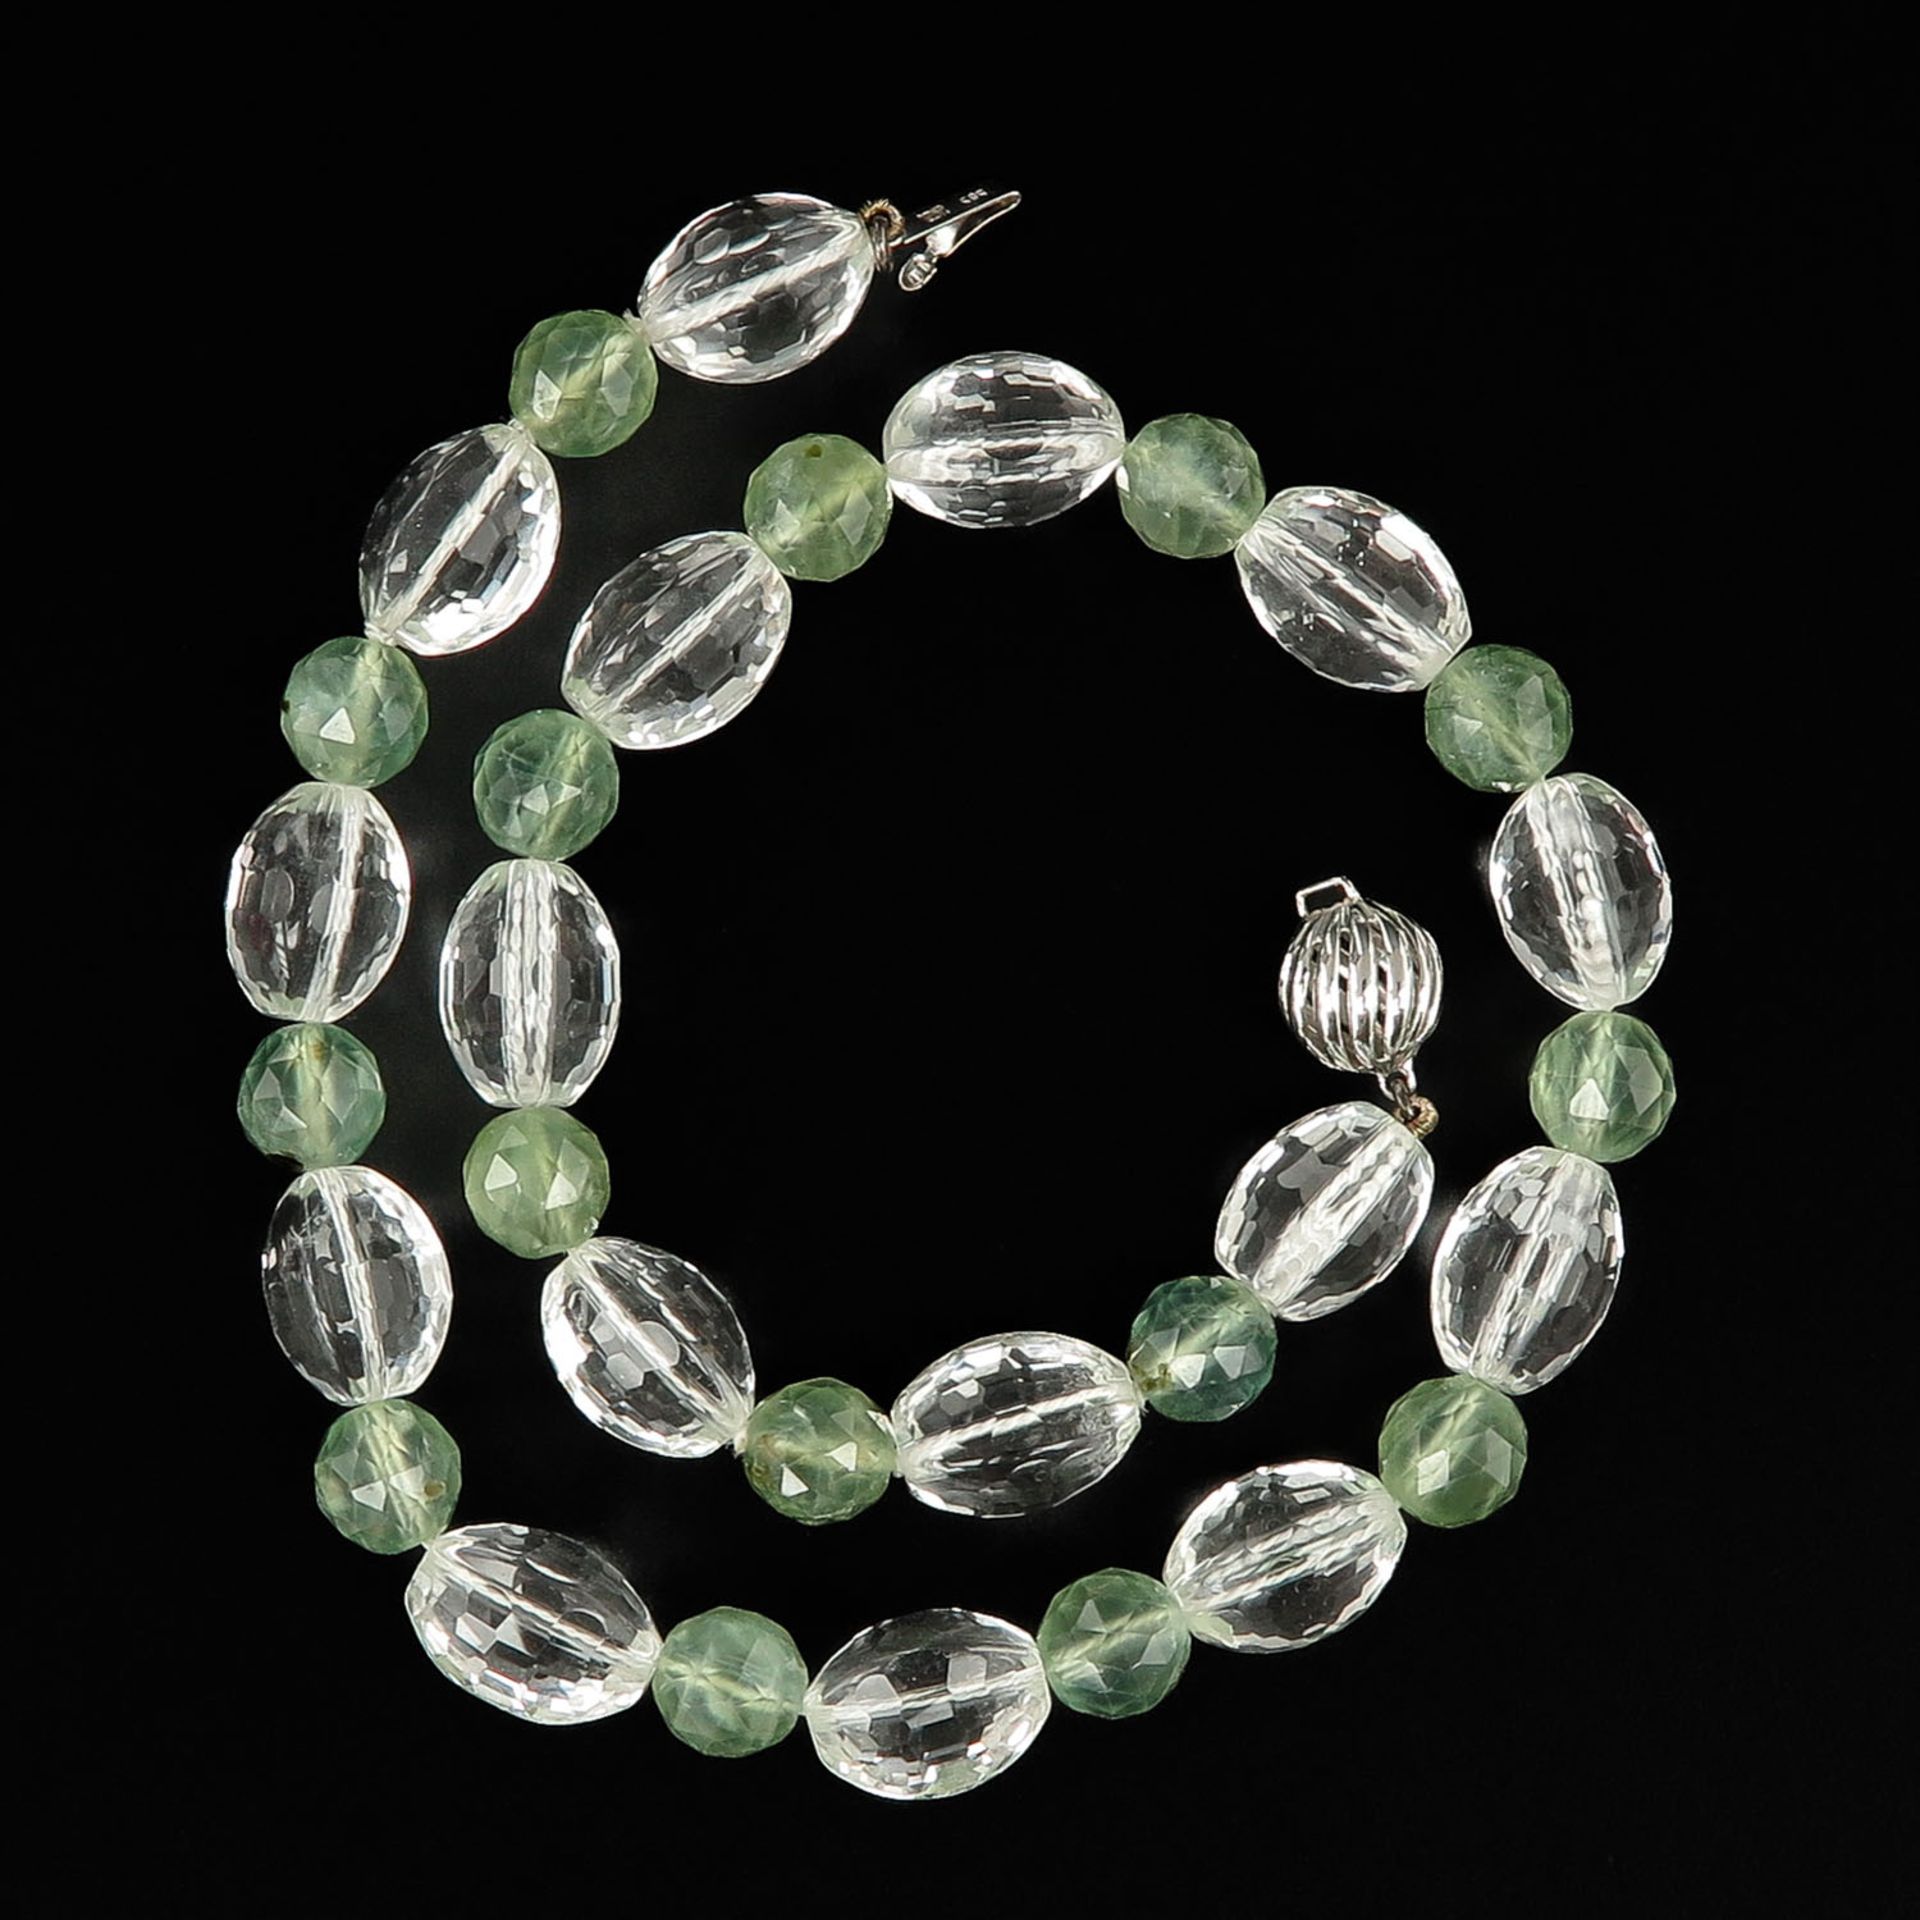 A Rock Crystal Necklace with 14KG Clasp - Image 3 of 6